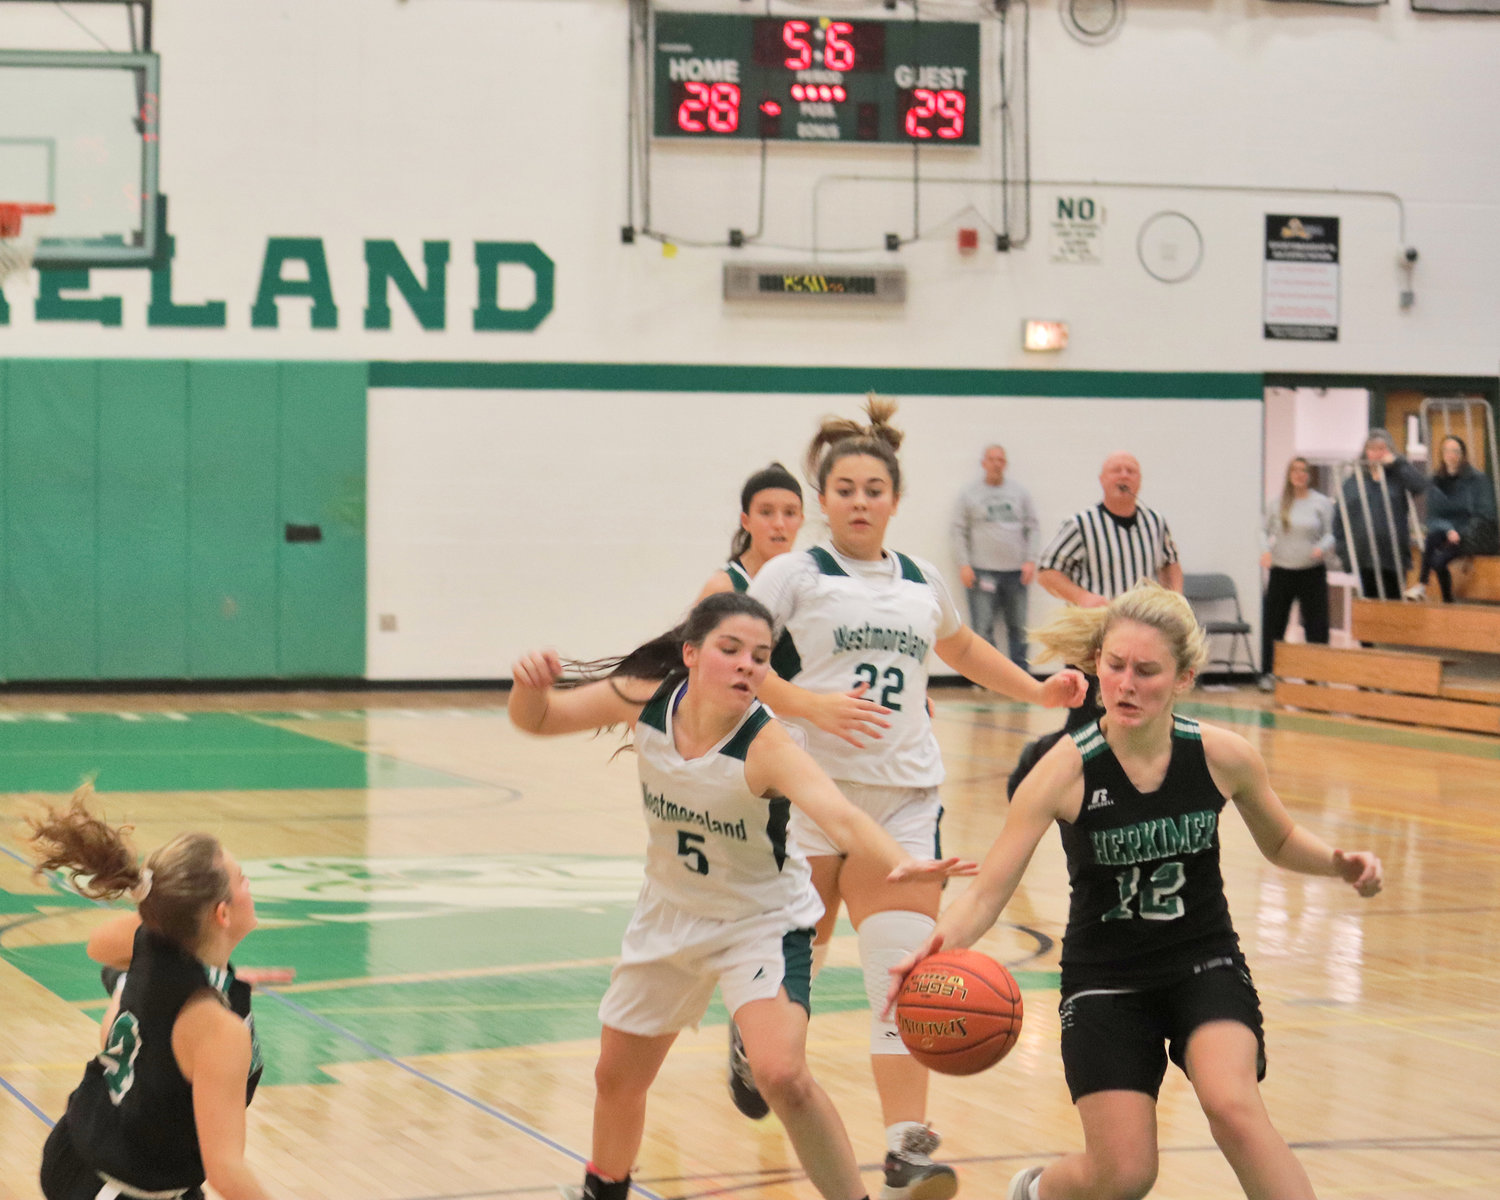 Westmoreland’s Madalynne Enos (5) scored with 2.8 seconds remaining Wednesday to help push the Bulldogs to a 30-29 win over Herkimer. It was Westmoreland’s first win of the season.